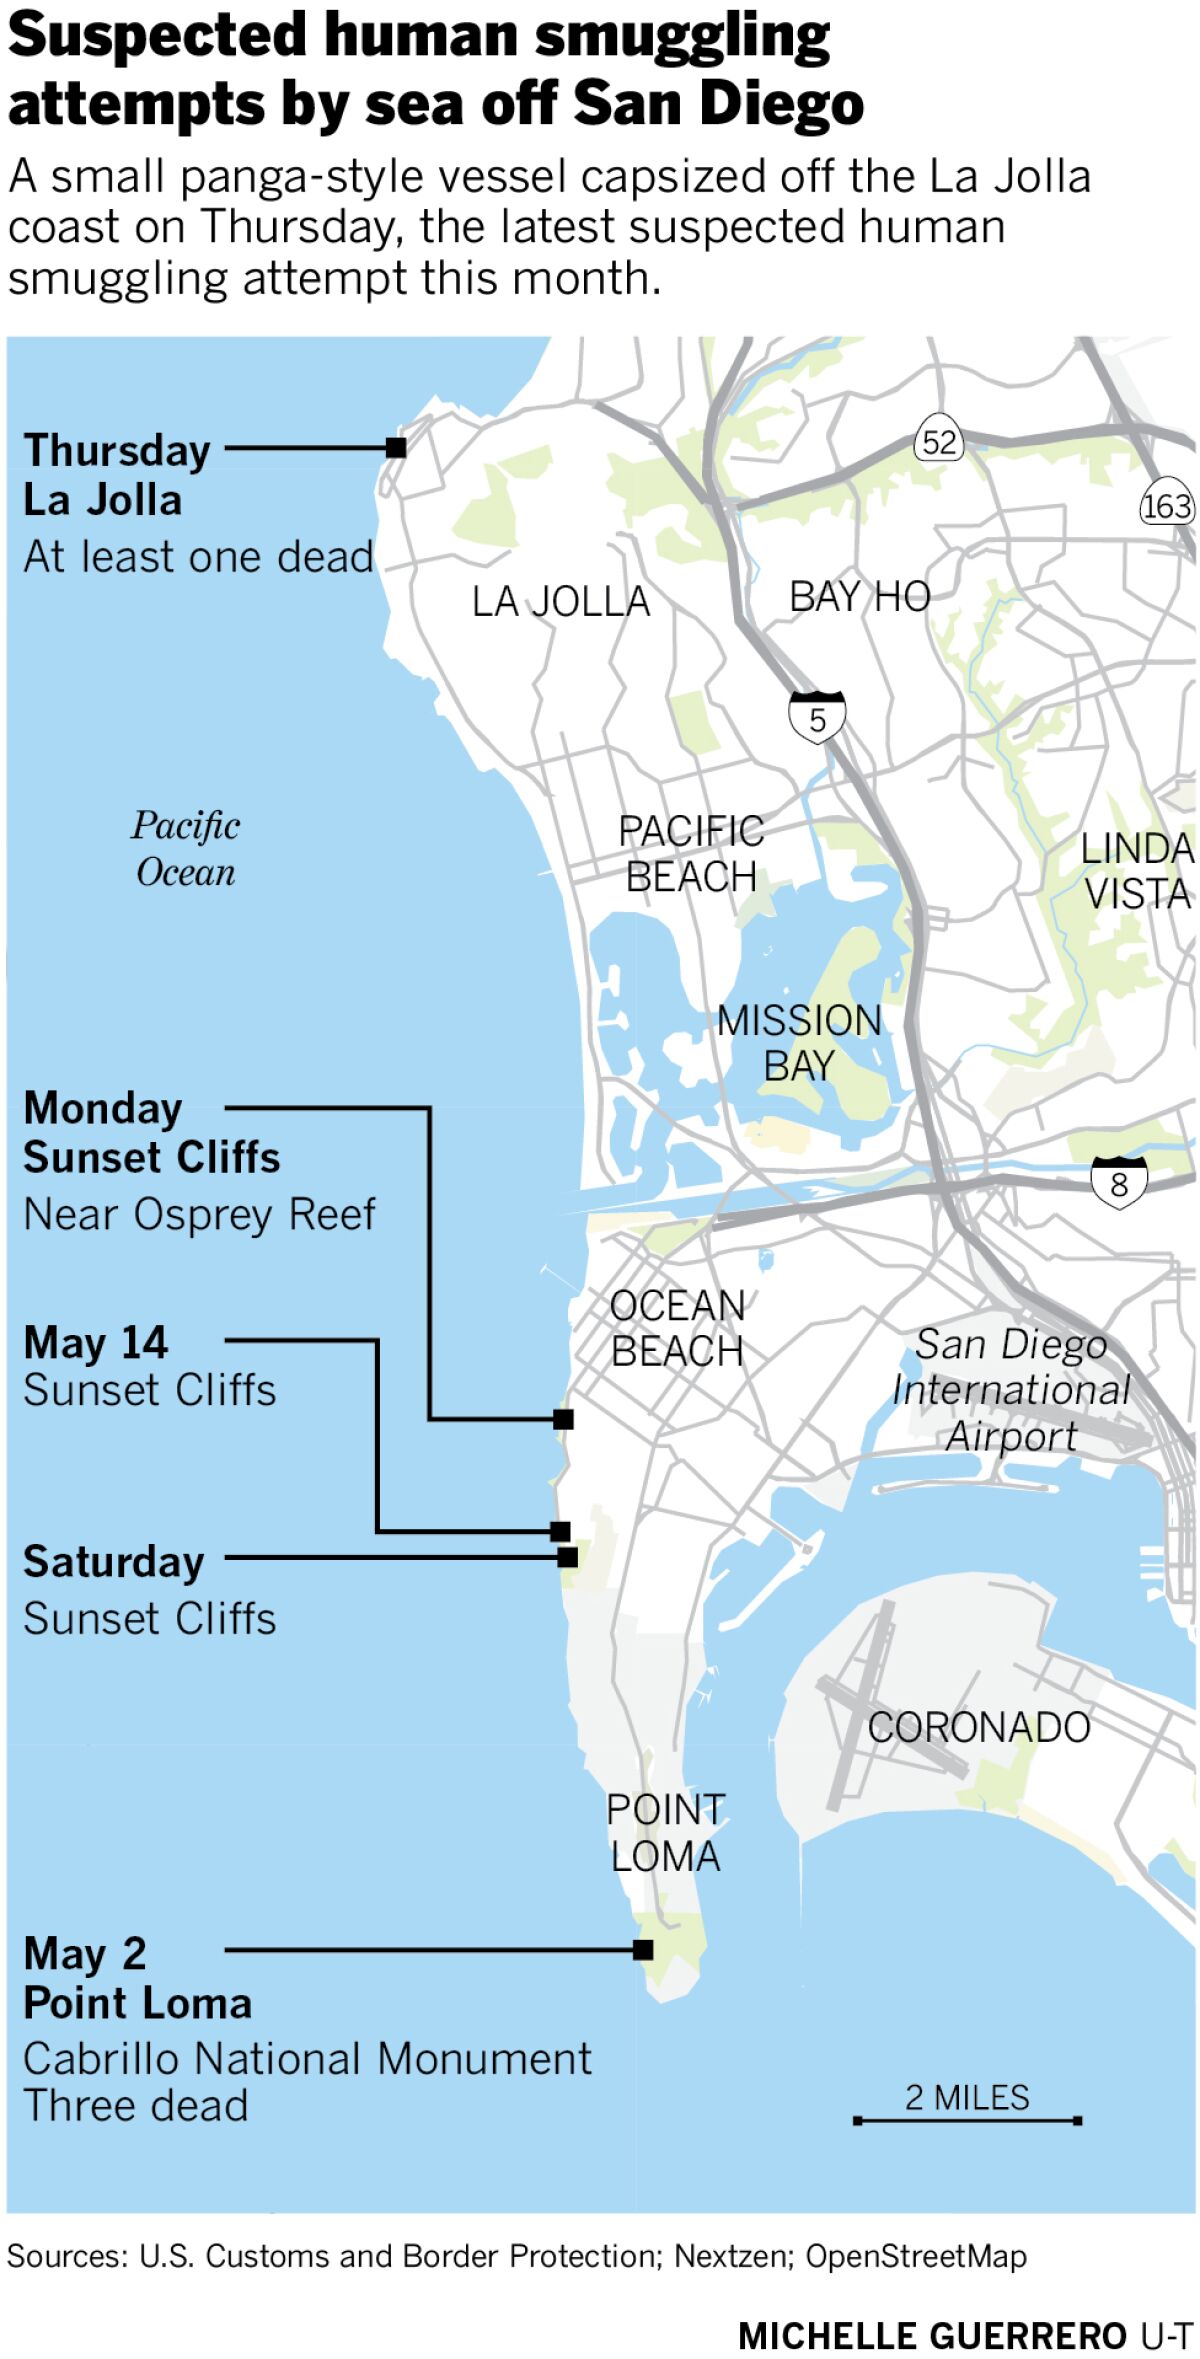 Suspected human smuggling attempts by sea off San Diego